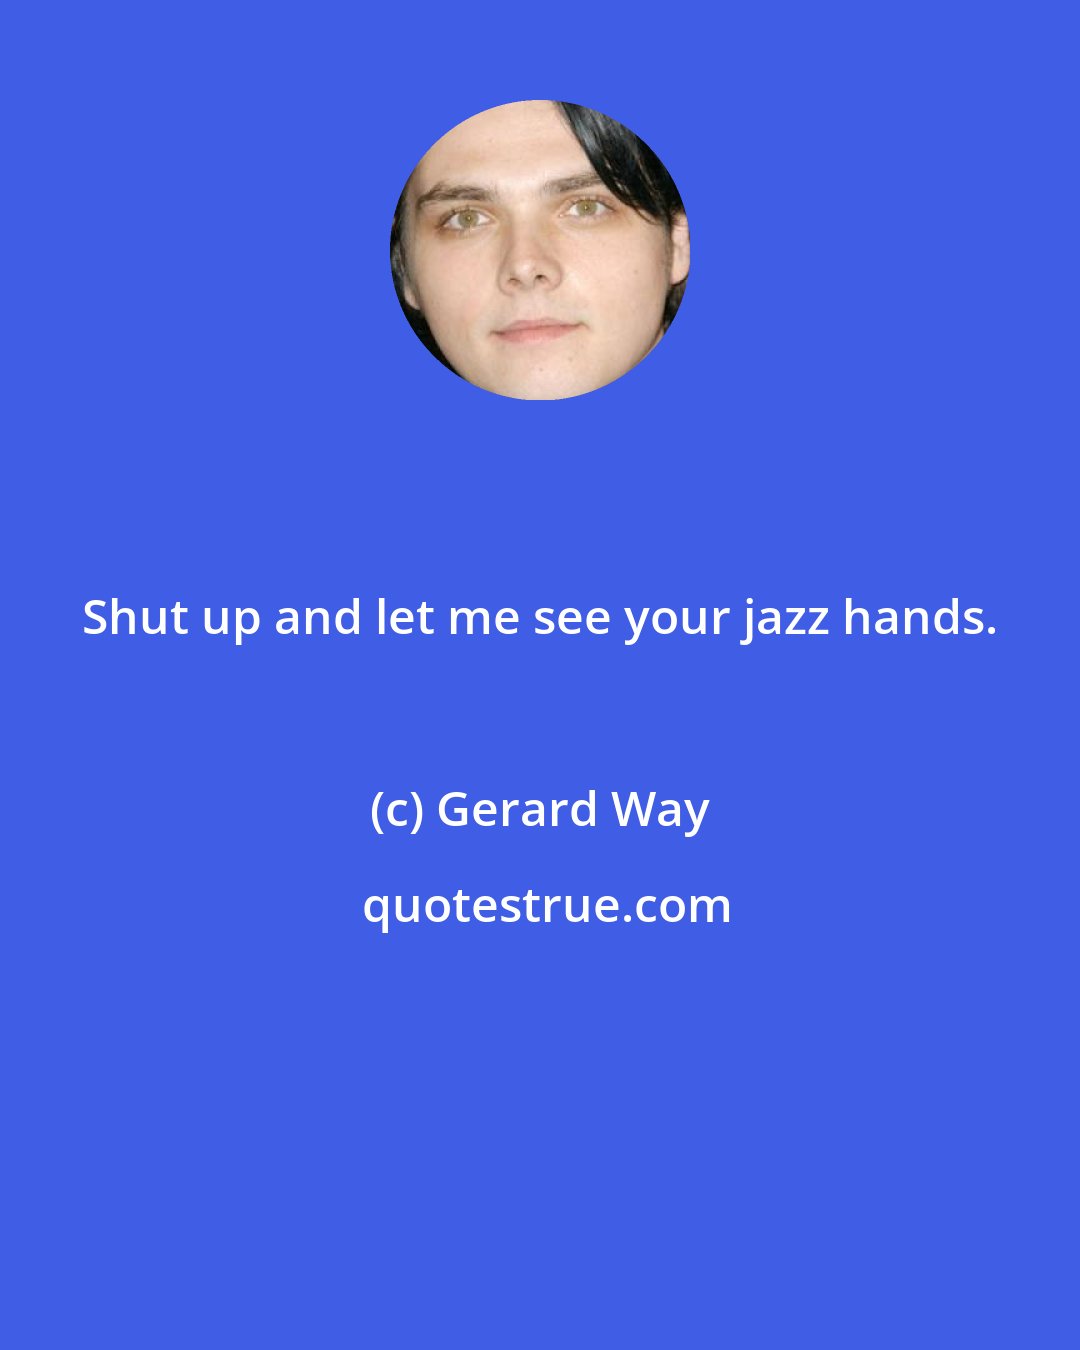 Gerard Way: Shut up and let me see your jazz hands.